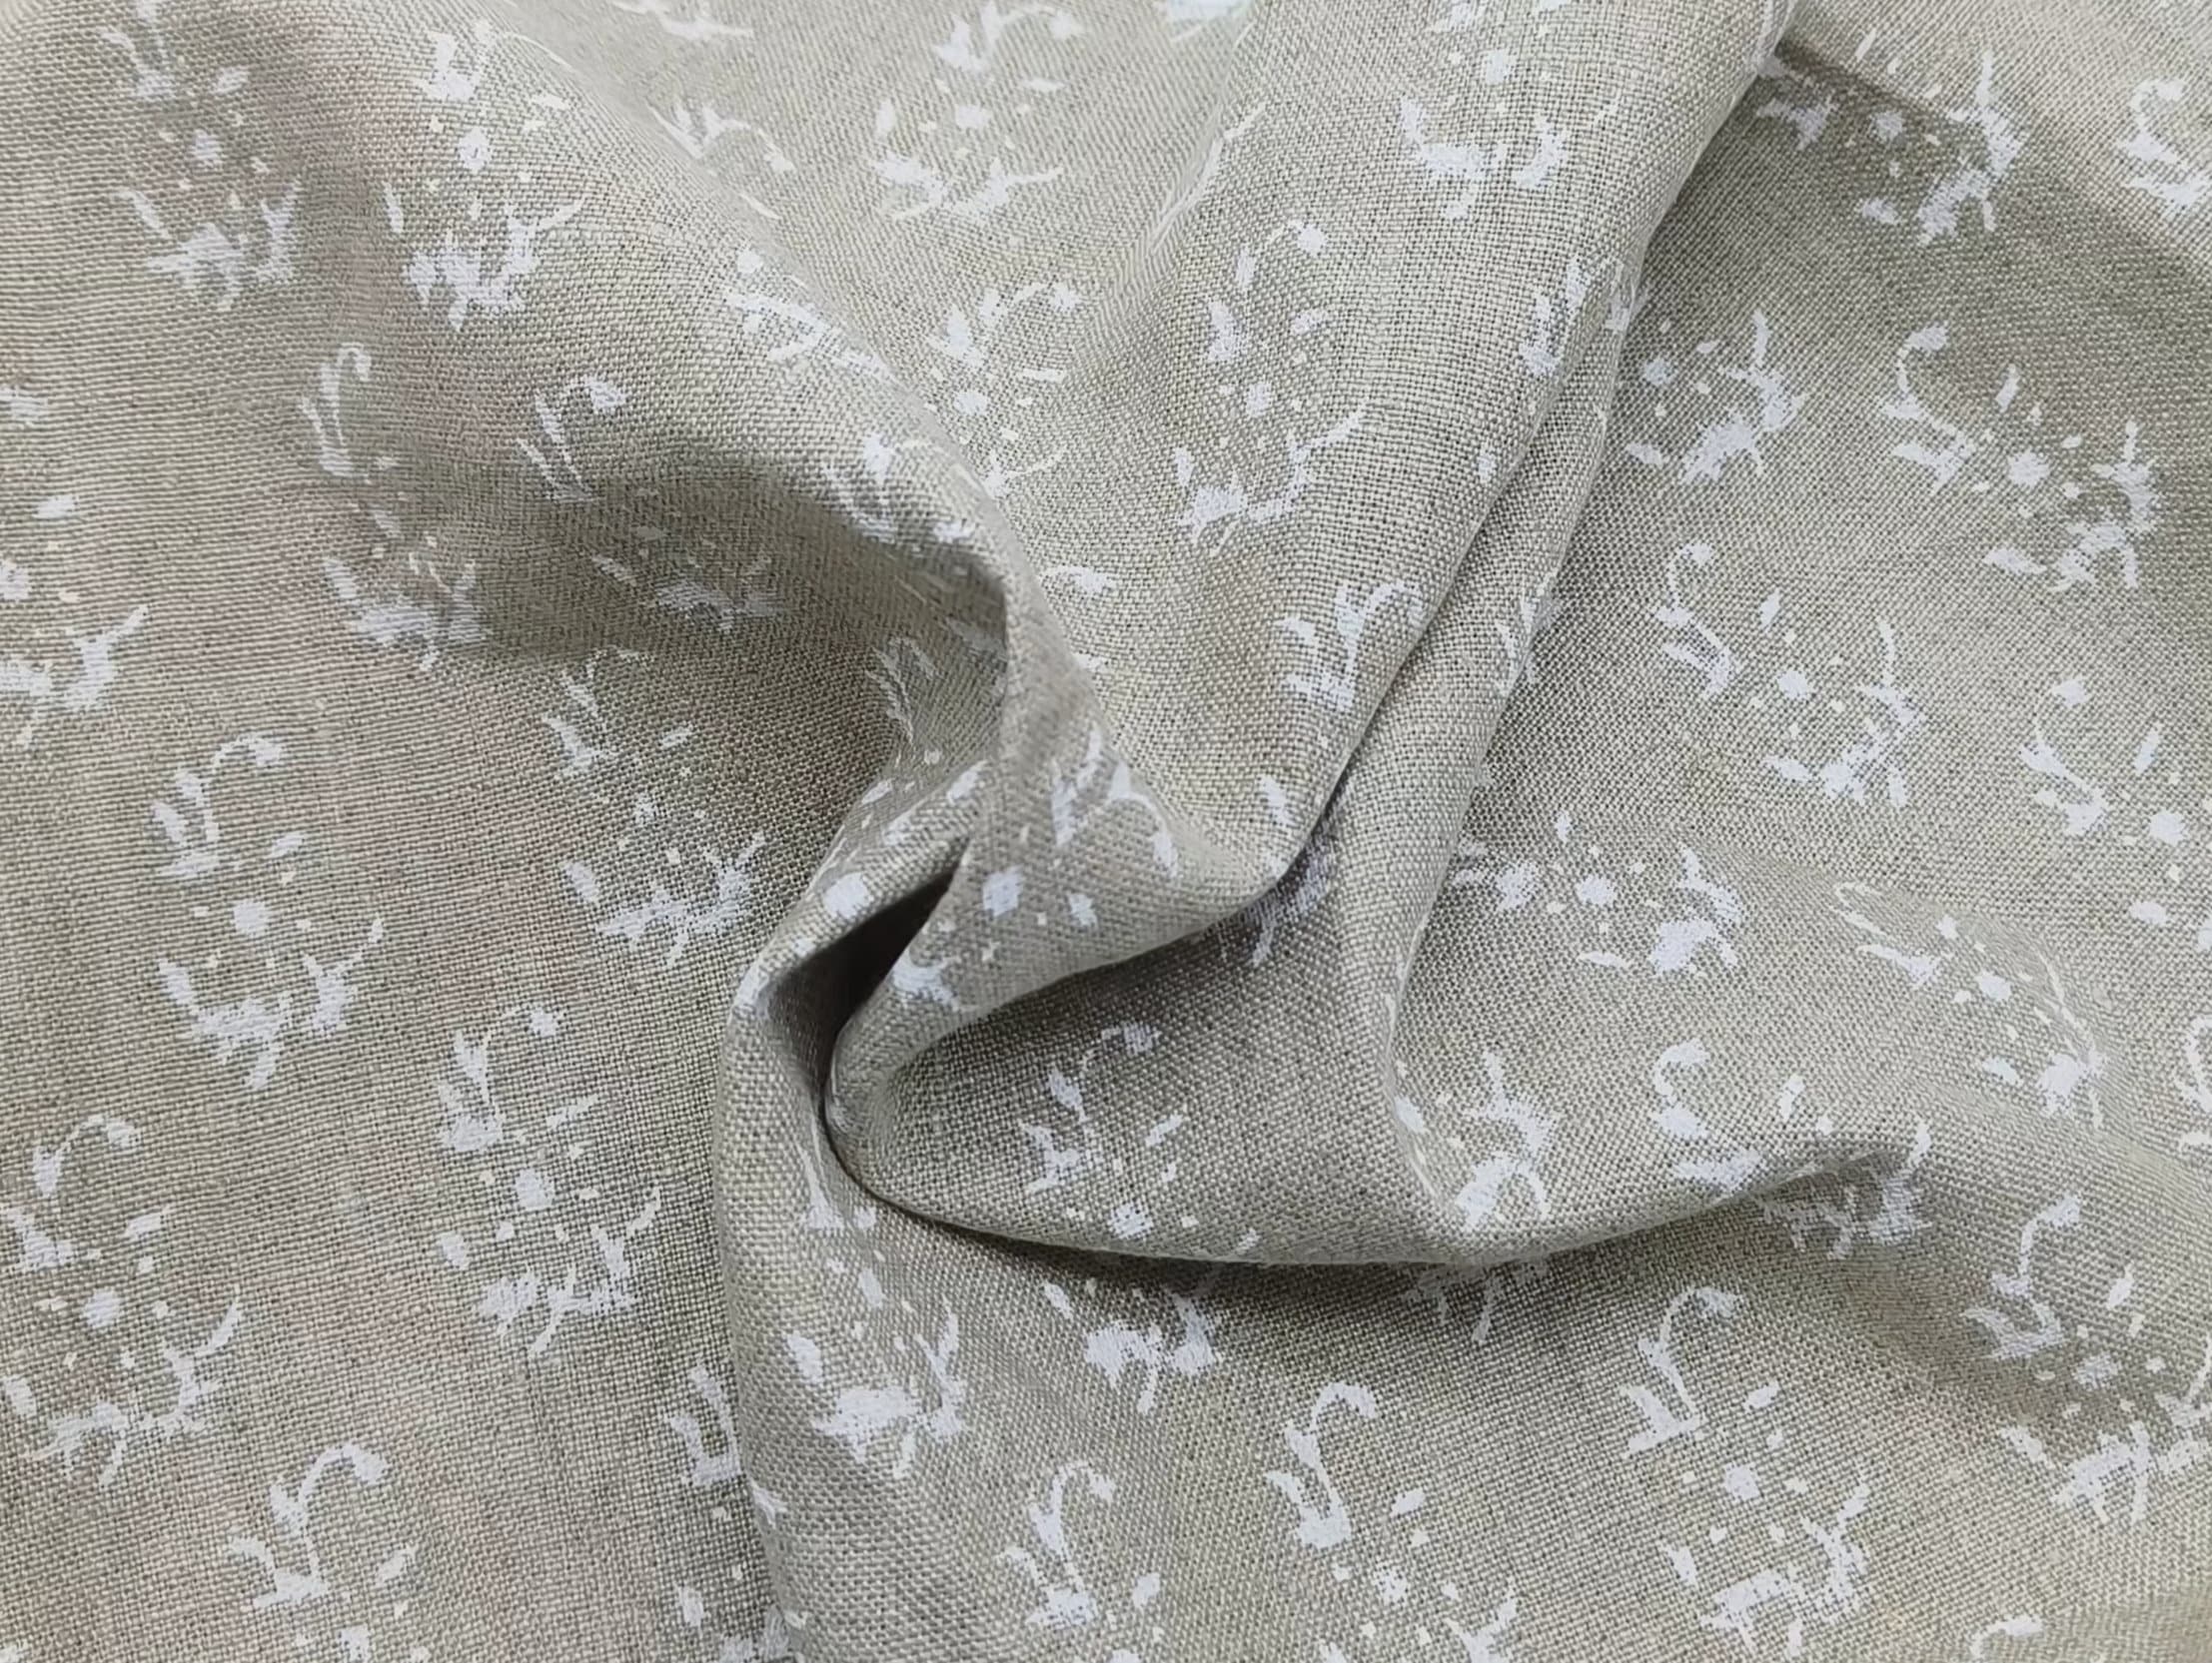 Block Print Linen Fabric, Patjhad White  Natural Pure Linen  Handblock Print Linen  Handloom Linen Fabric  Indian Floral Pattern  Home & Interior